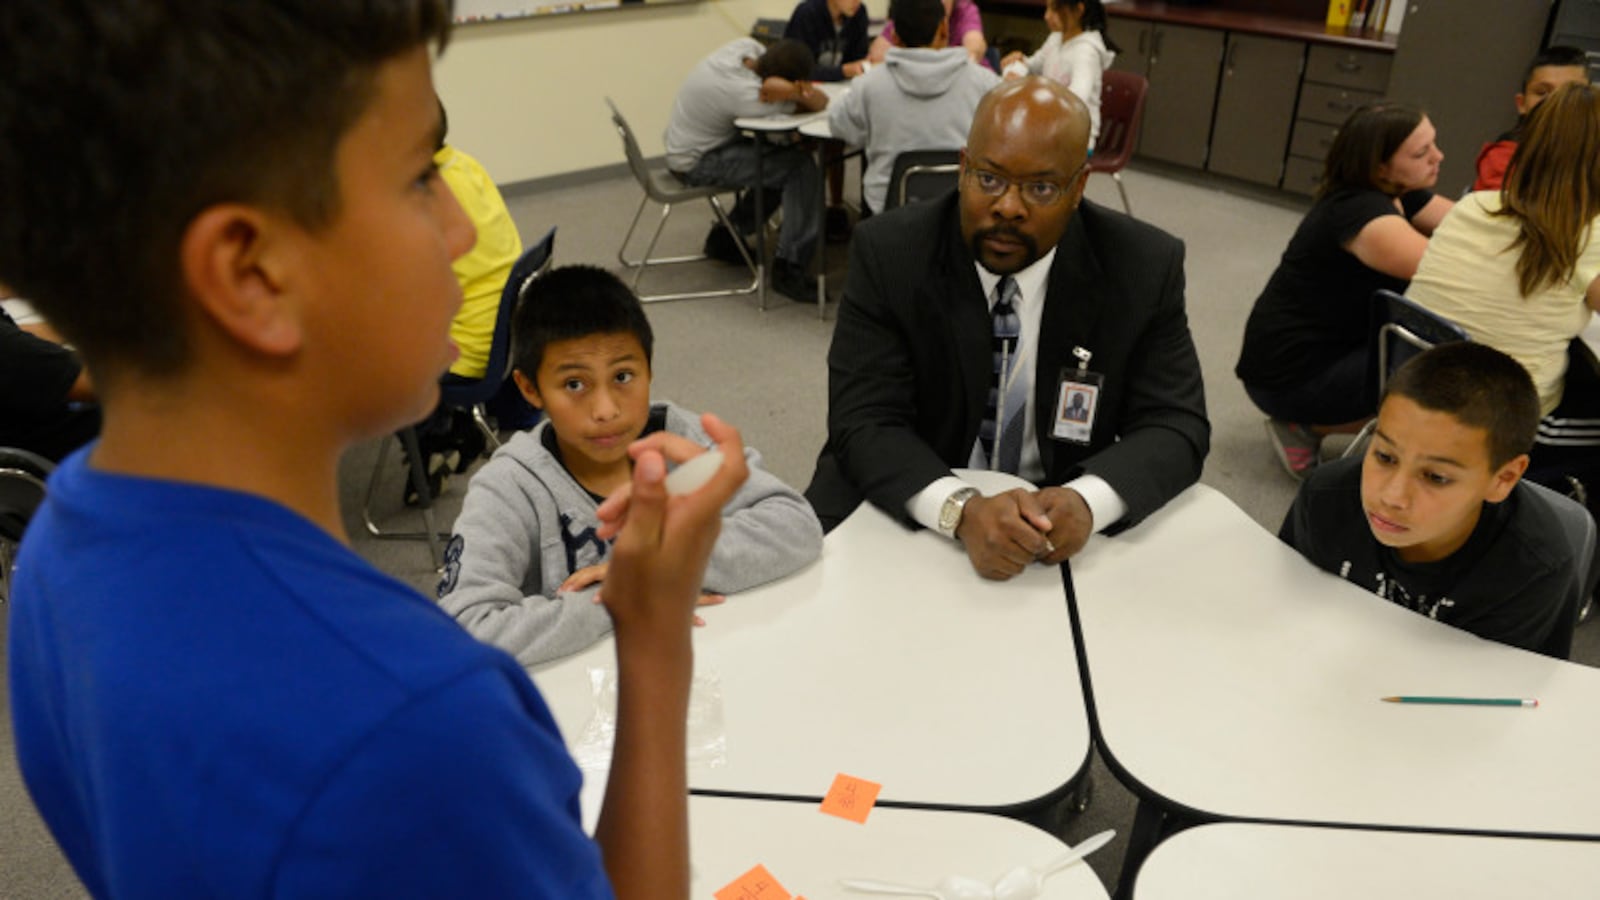 A boy in a blue shirt works on a math card game problem with two other students seen at the table while Superintendent Rico Munn sits on the corner of the table, wearing a black suit and tie.